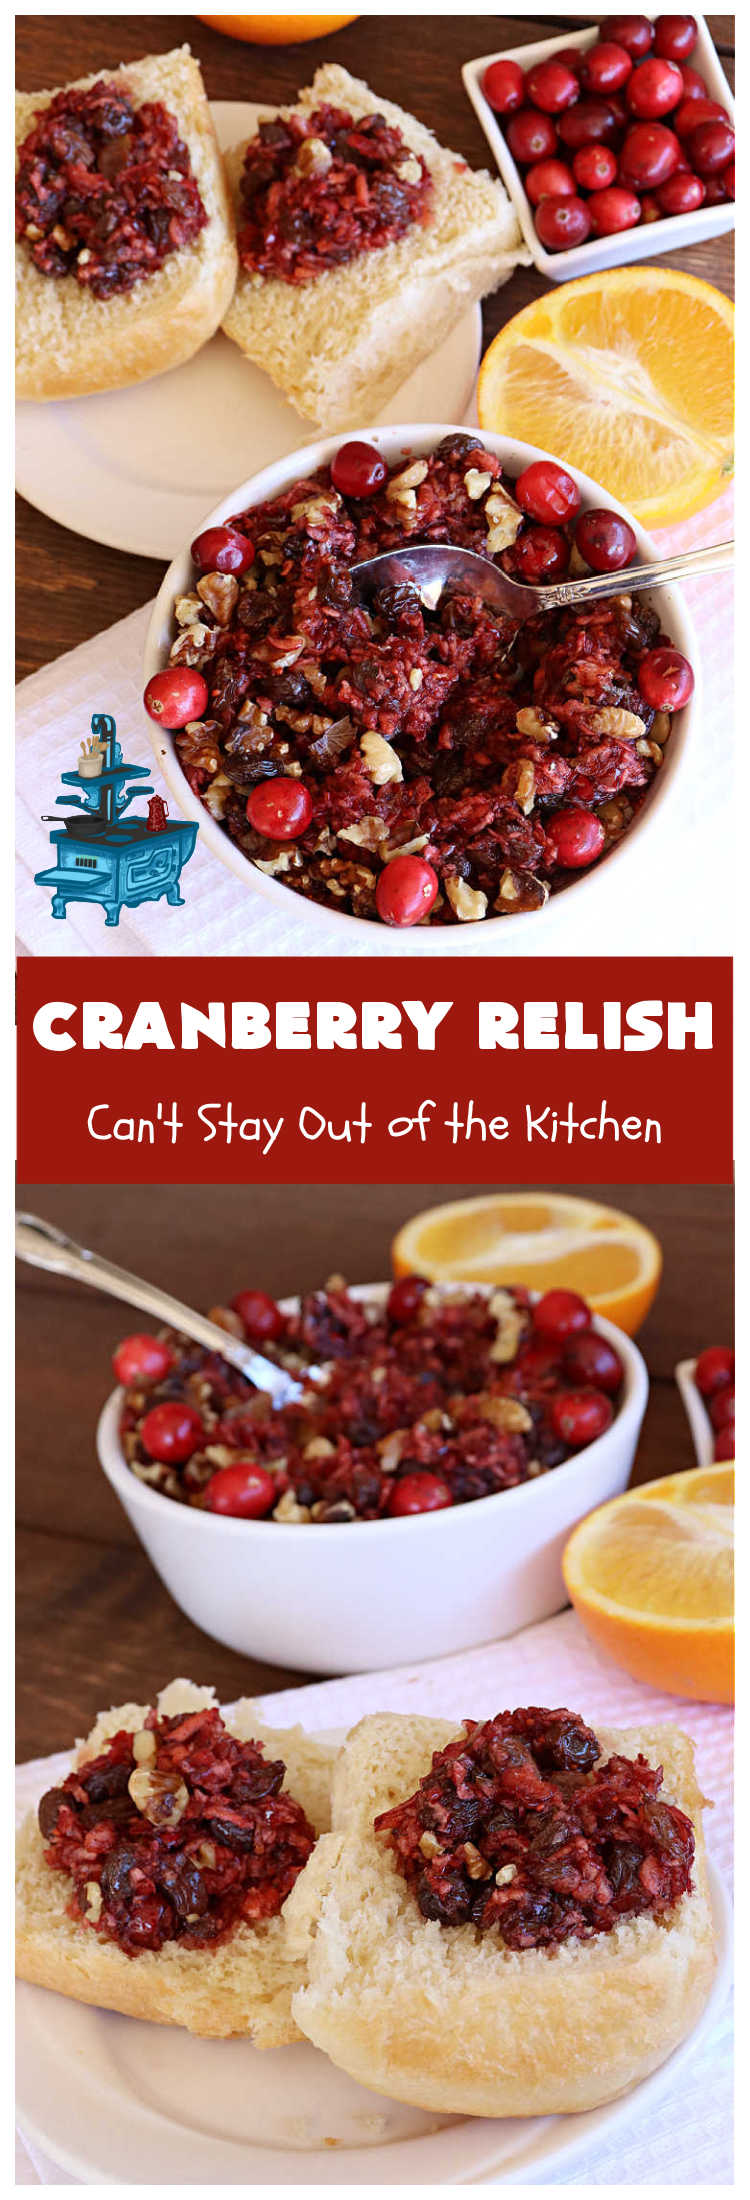 Cranberry Relish | Can't Stay Out of the Kitchen | this easy peasy #recipe is perfect for #turkey, #ham or #PorkTenderloin. While this #appetizer is marvelous for #holidays like #Thanksgiving or #Christmas, if you freeze fresh #cranberries you can enjoy it throughout the year. We serve it over #HomemadeRolls. #raisins #LemonZest #OrangeJuice #relish #CranberryRelish